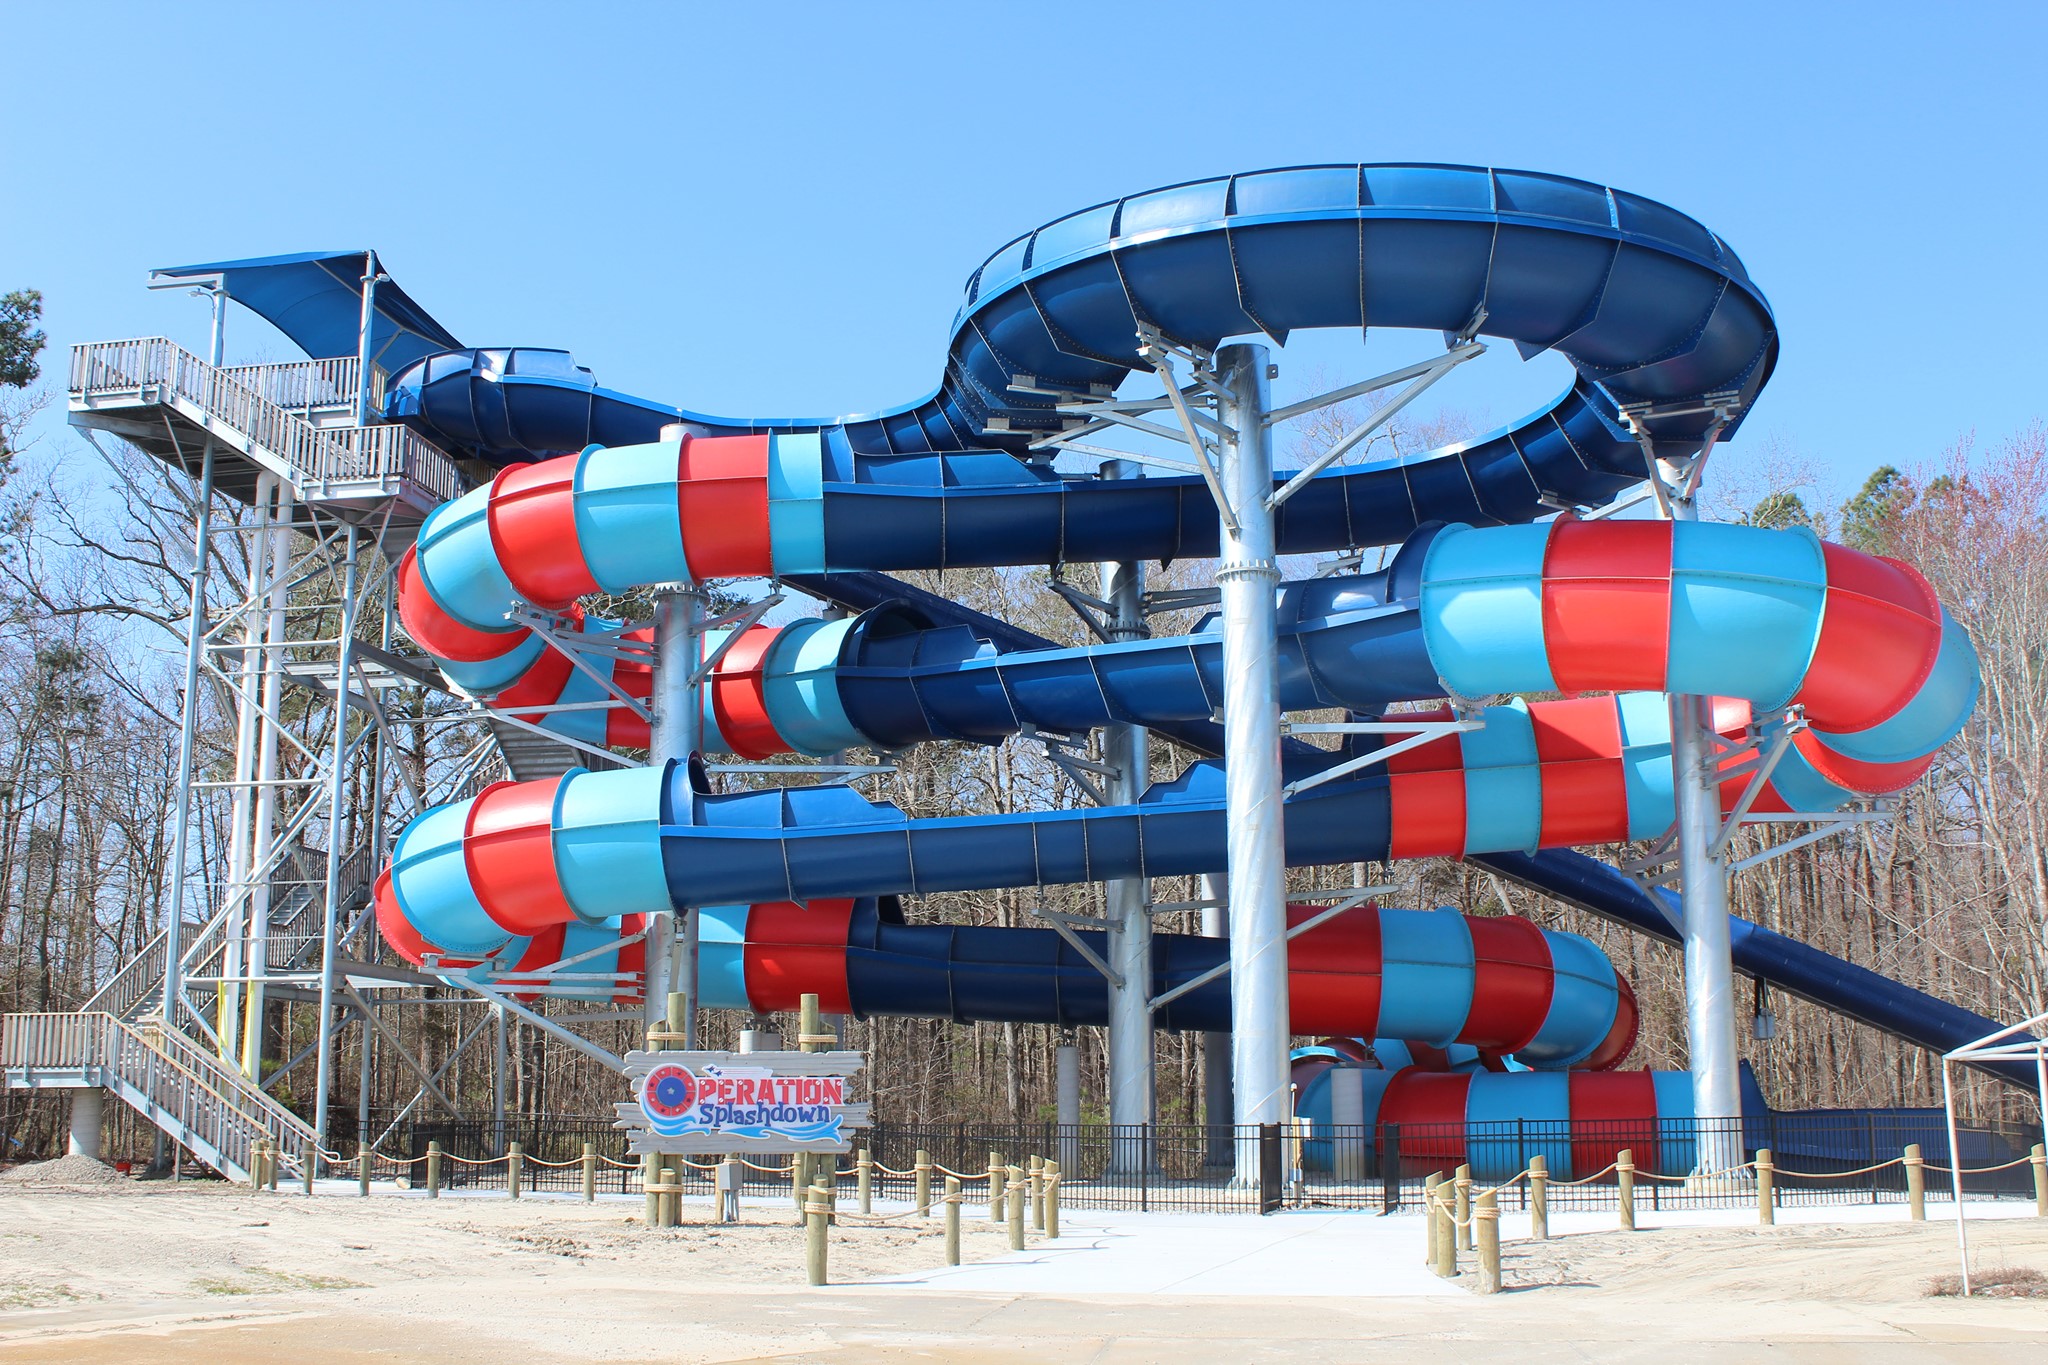 The Ocean Breeze Waterpark is one of the most popular summer attractions in Virginia Beach